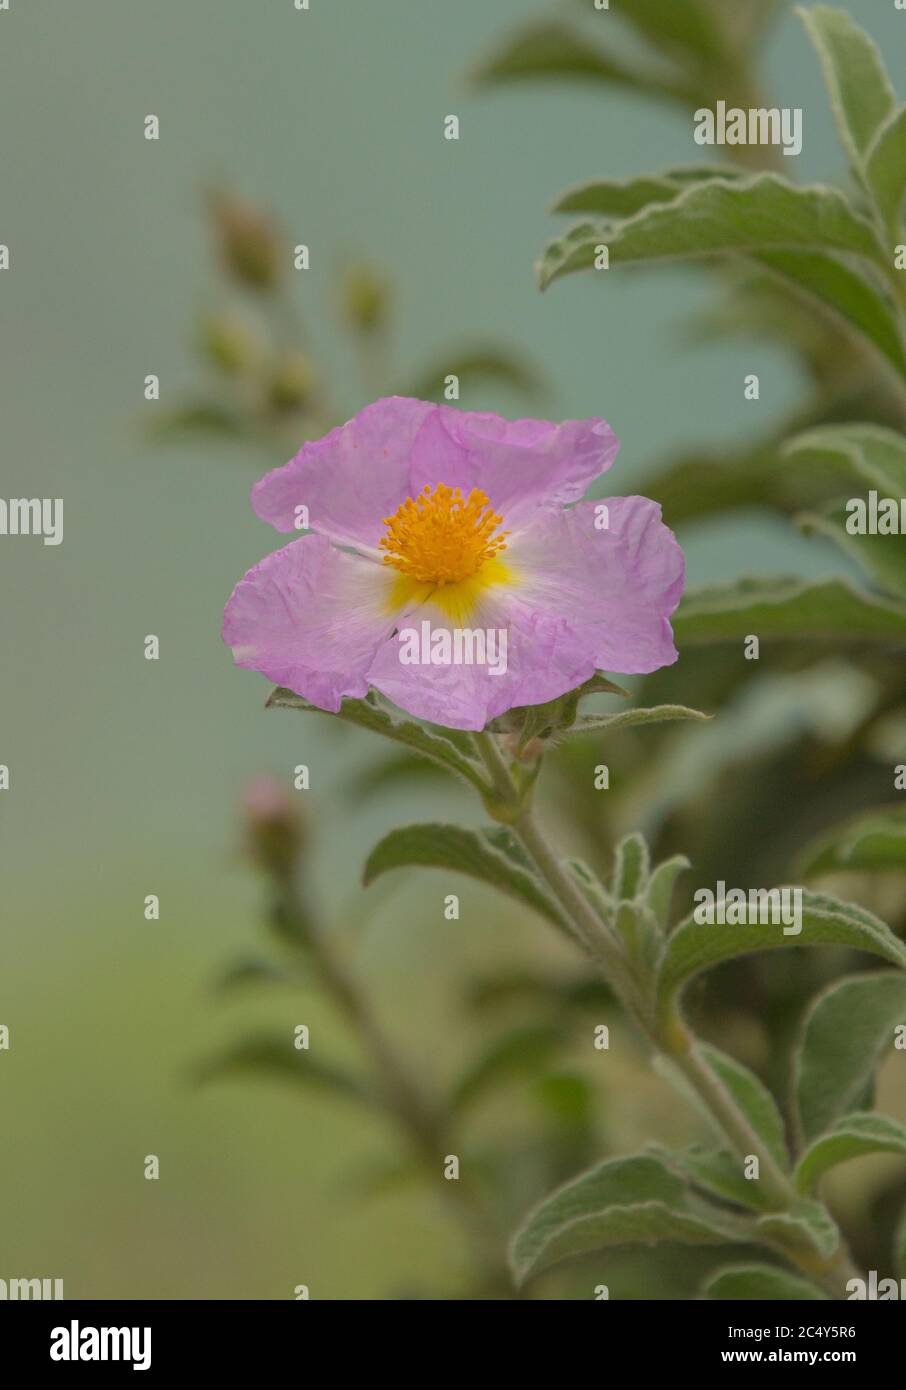 cistus creticus (rock rose), a medical plant used for aromatherapy, naturopathy and bach flowers in the protected area of Monte Brione, Riva del Garda Stock Photo